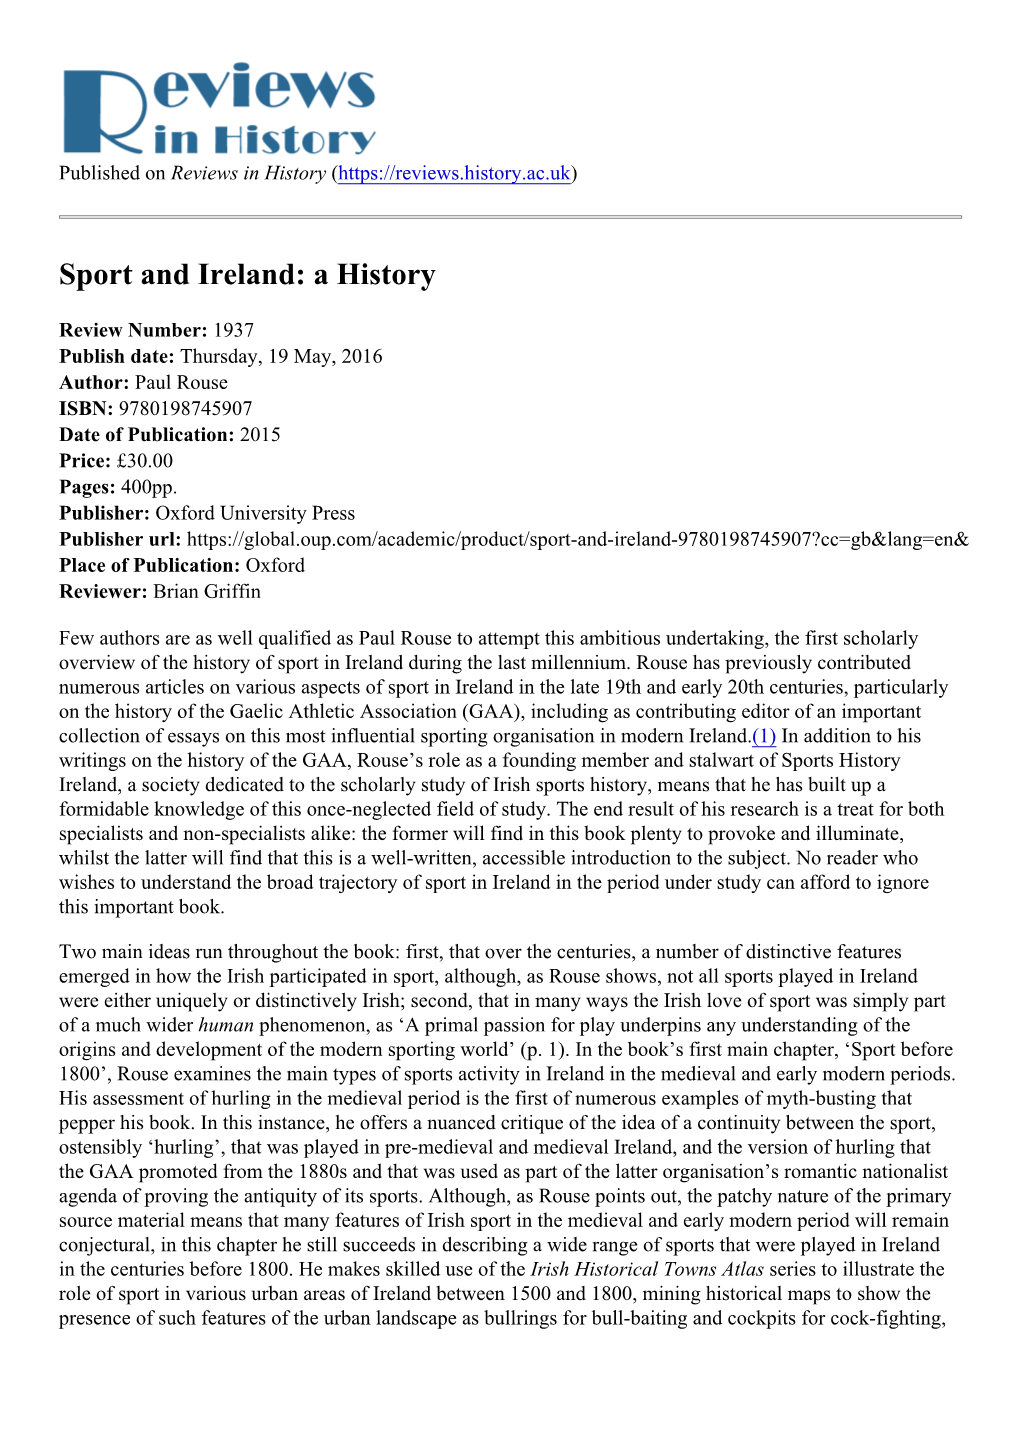 Sport and Ireland: a History